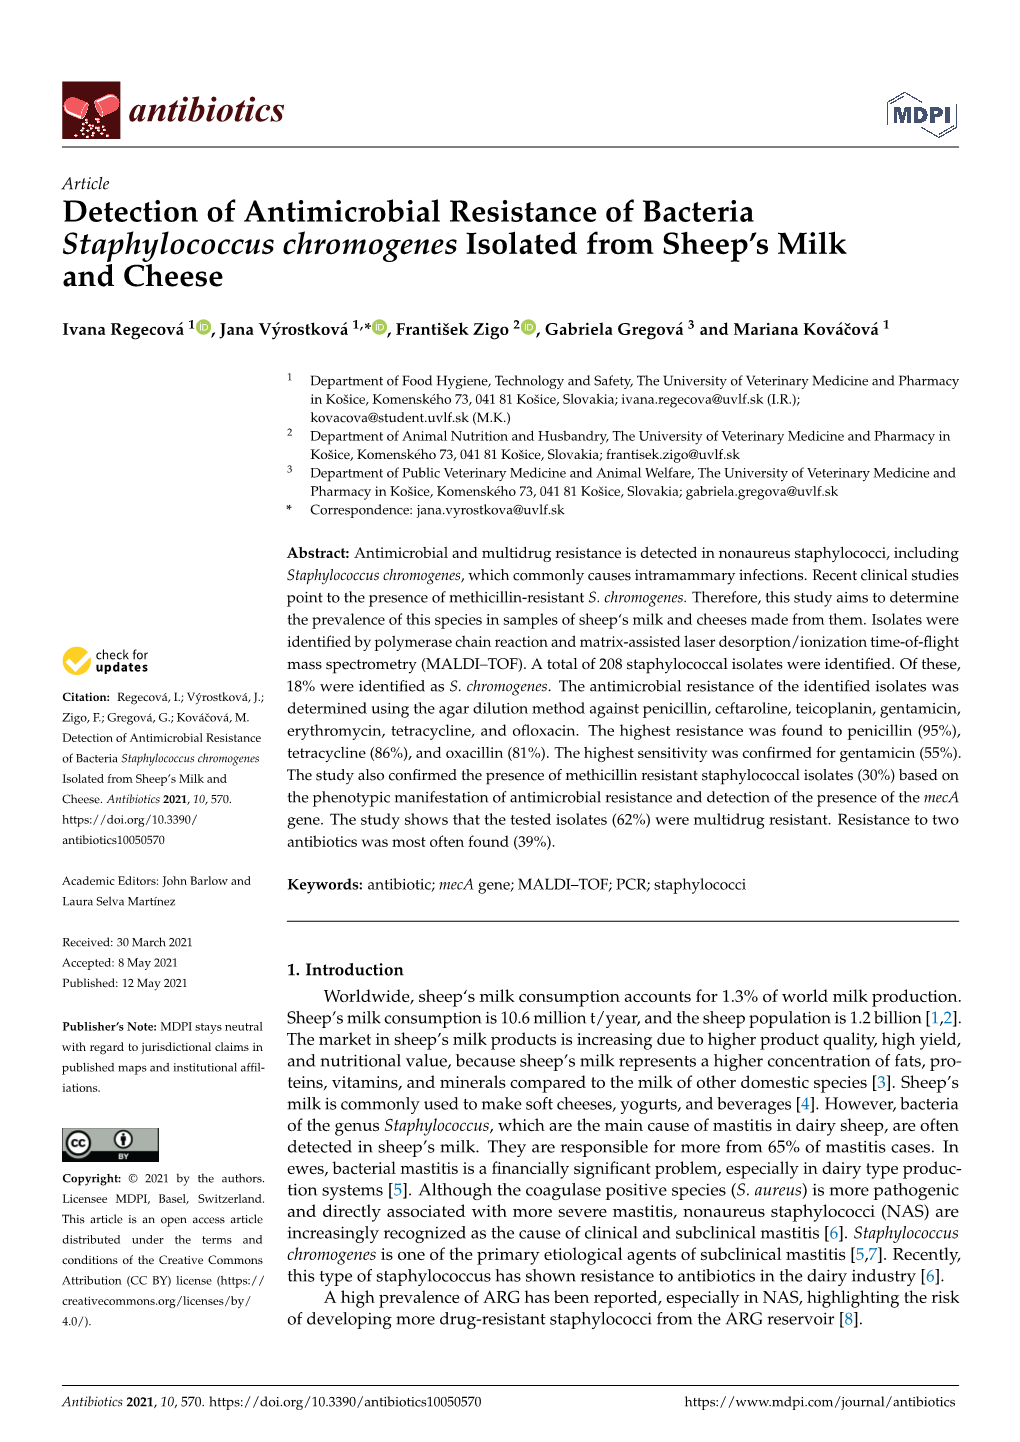 Detection of Antimicrobial Resistance of Bacteria Staphylococcus Chromogenes Isolated from Sheep’S Milk and Cheese